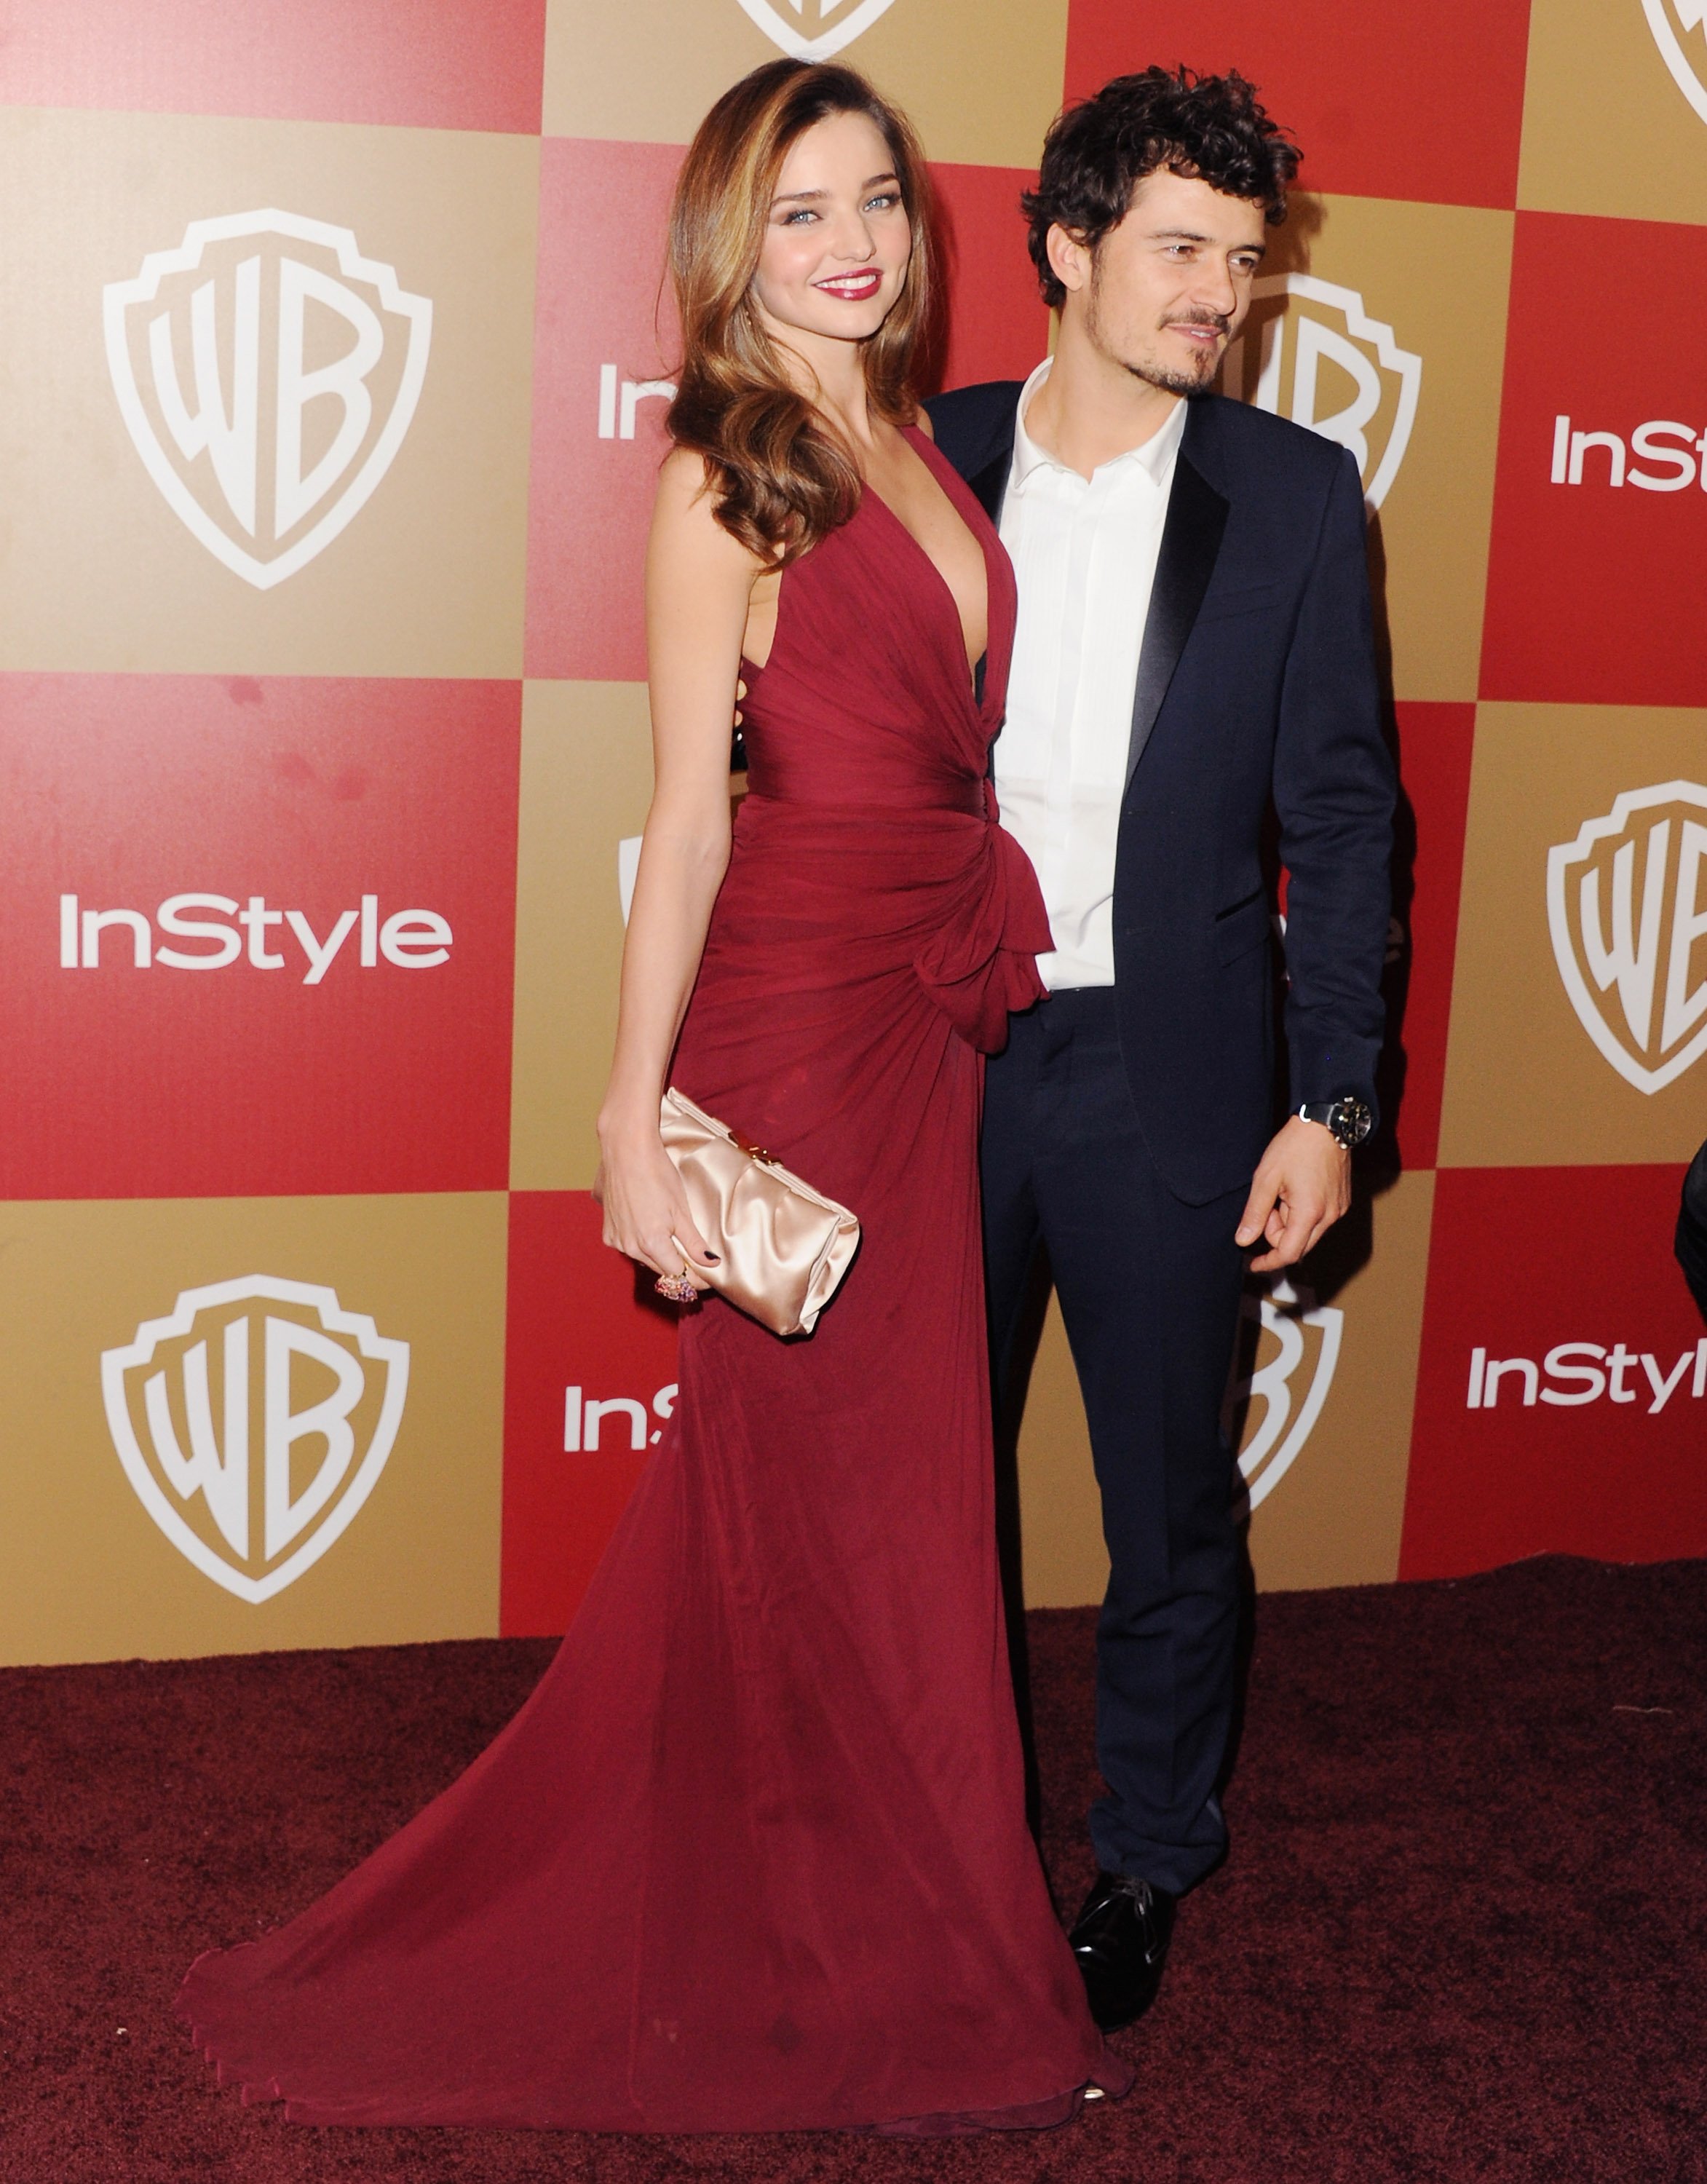 Miranda Kerr and Orlando Bloom attend the InStyle And Warner Bros. Golden Globe Party at The Beverly Hilton Hotel on January 13, 2013, in Beverly Hills, California. | Source: Getty Images